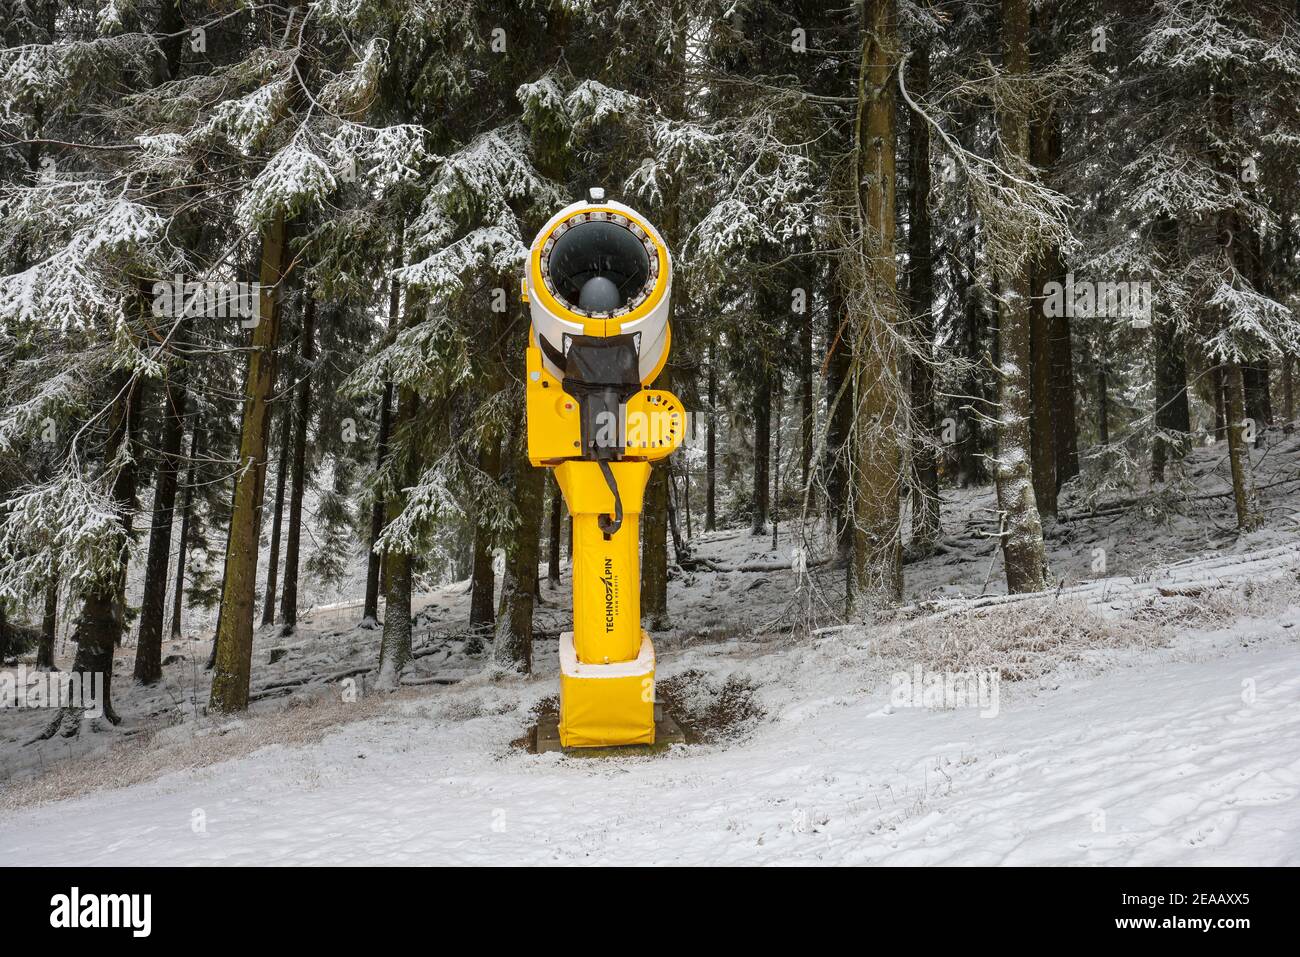 December 7th, 2020, Winterberg, Sauerland, North Rhine-Westphalia, Germany, Snow cannon at the ski carousel, no winter sports in Winterberg during the corona crisis during the second part of the lockdown, ski lifts remain closed in accordance with the new Corona Protection Ordinance in NRW. 00X201207D031CARO Stock Photo